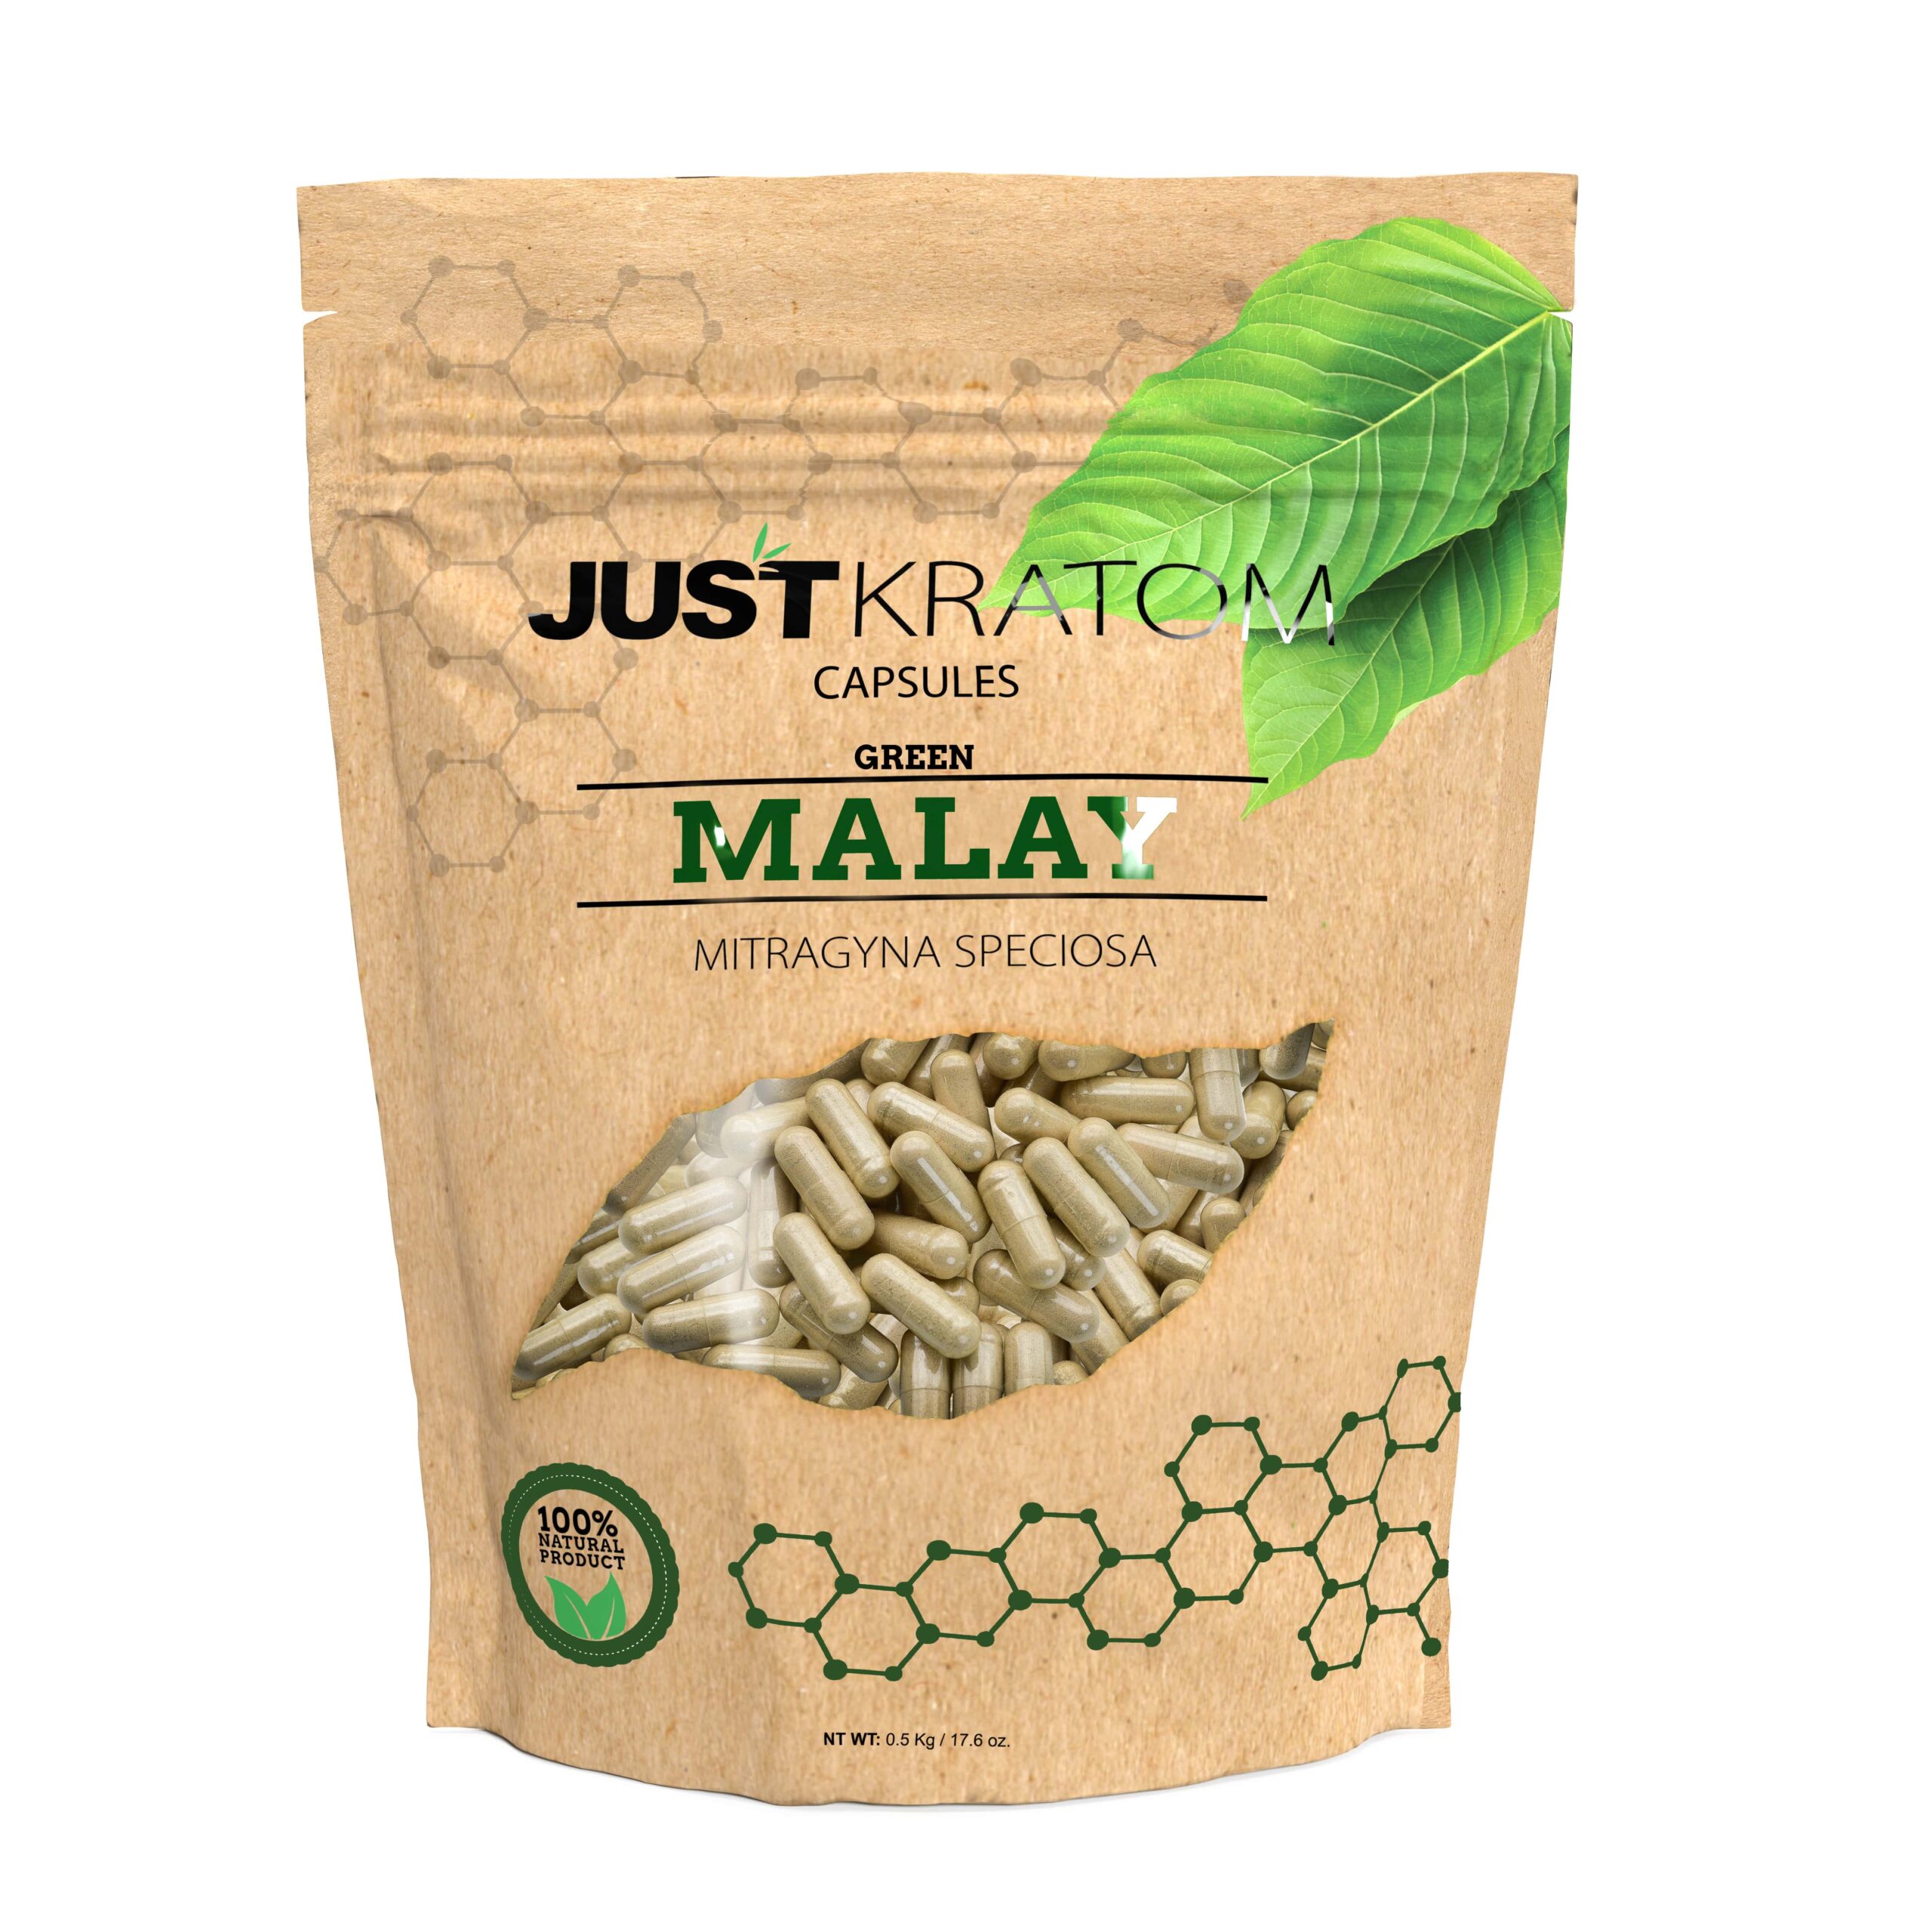 Kratom Capsules By Just Kratom-Sailing Through Serenity: A Personal Review of Just Kratom’s Capsules Collection post thumbnail image